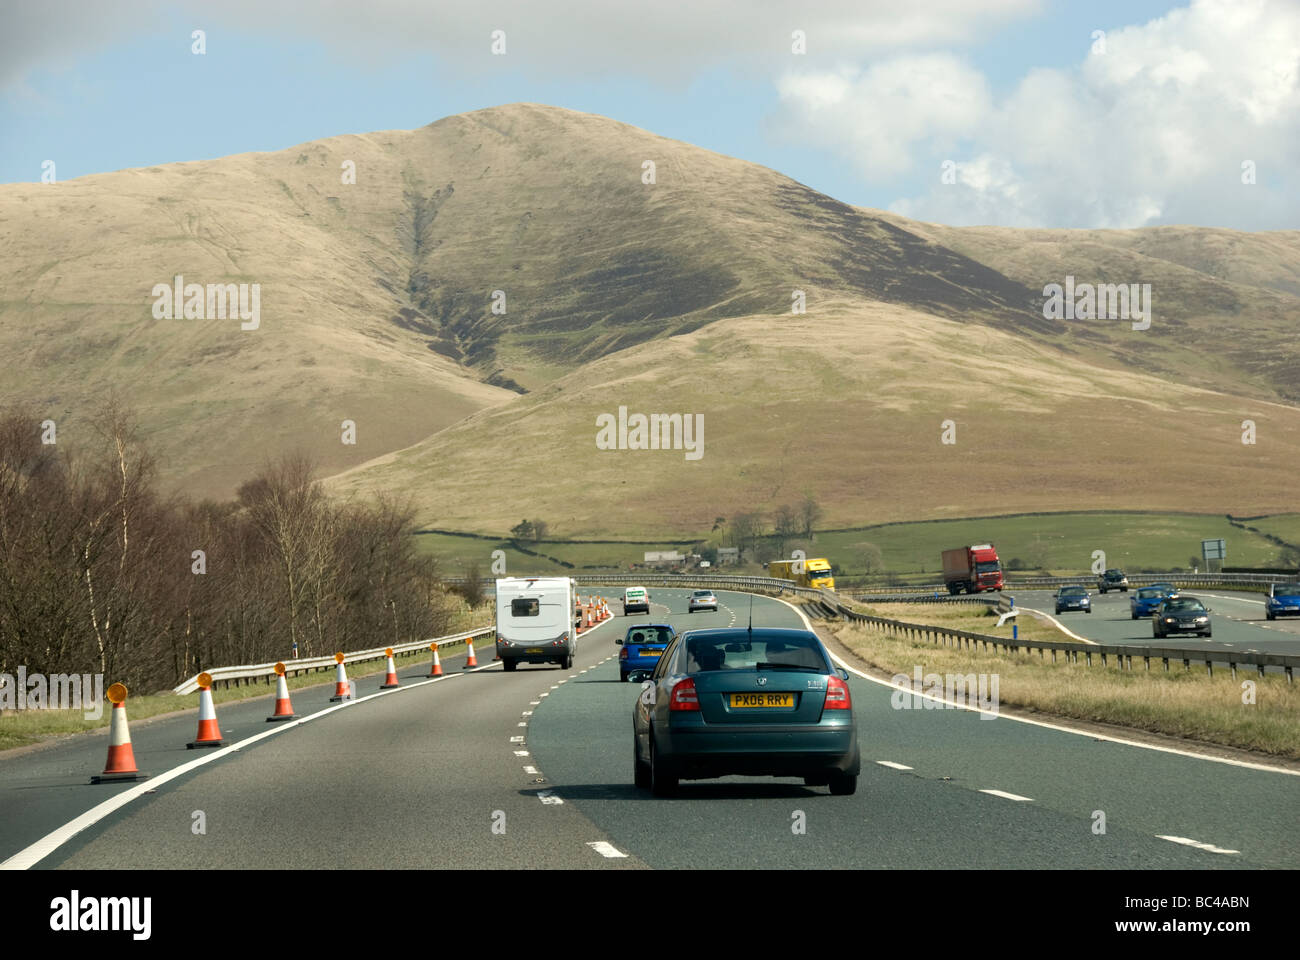 M6 Motorway northbound heading into Cumbria UK showing mountains and hills with blue sky Stock Photo